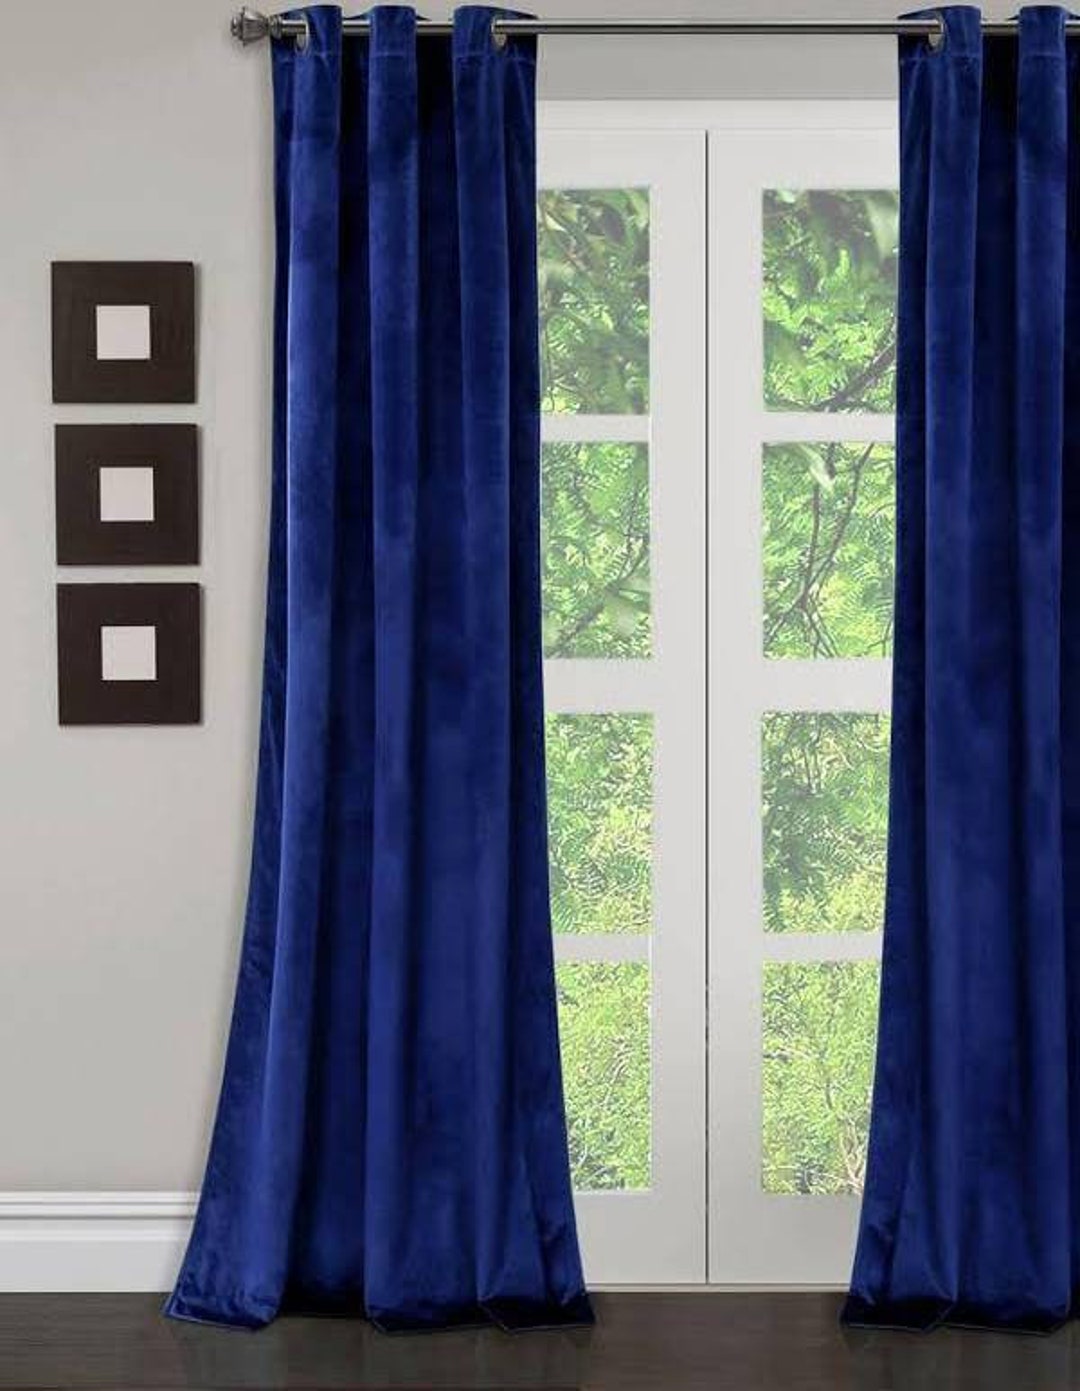 Velvet Lined Royal Blue Curtain 42 X 84 Inches 1 Panel Grommet Eyelet  Curtain Panel for Bedroom Living Room Home Decor Curtains 